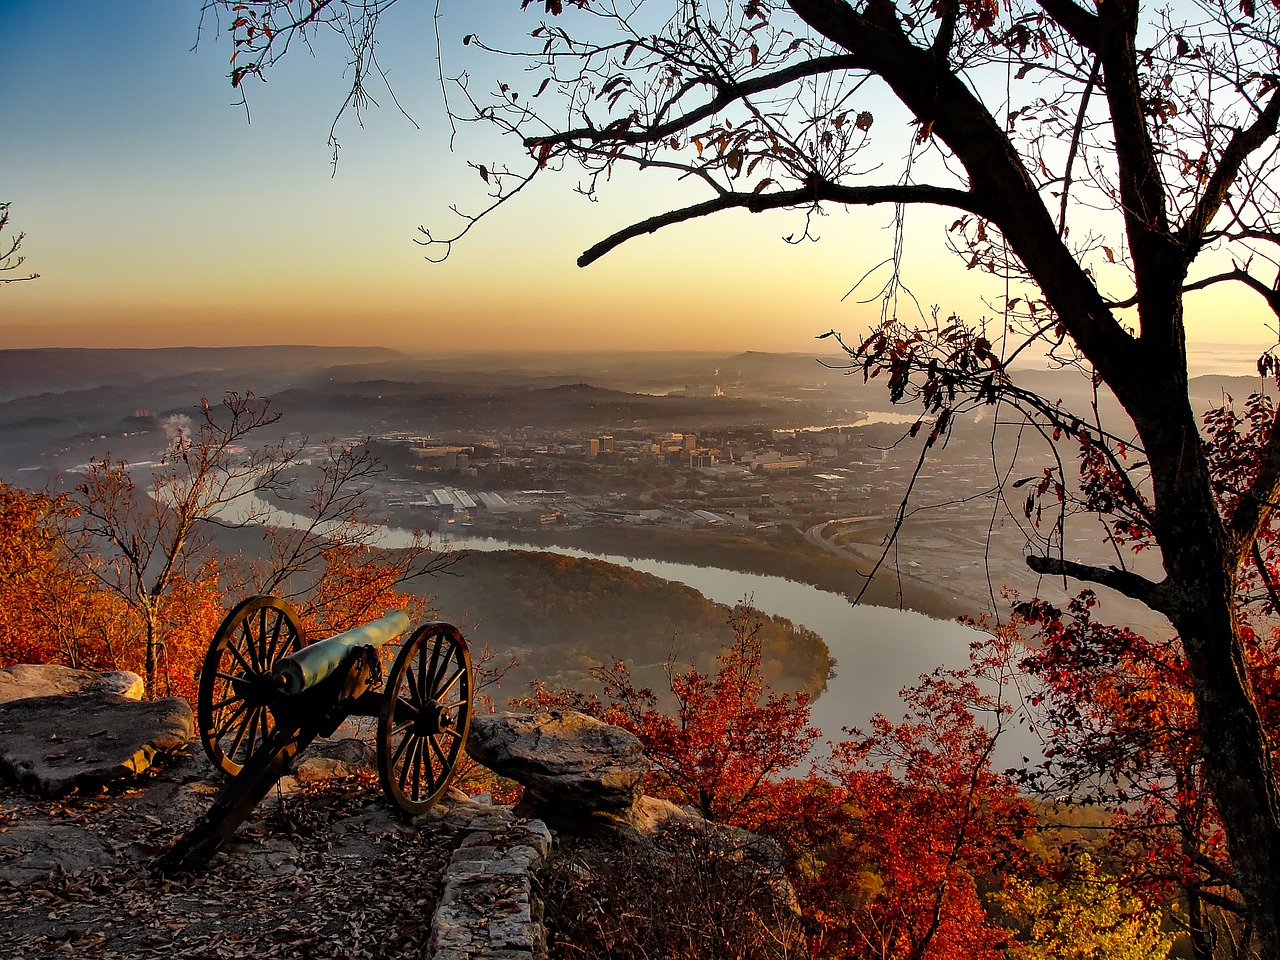 Chattanooga Adventure in a Day